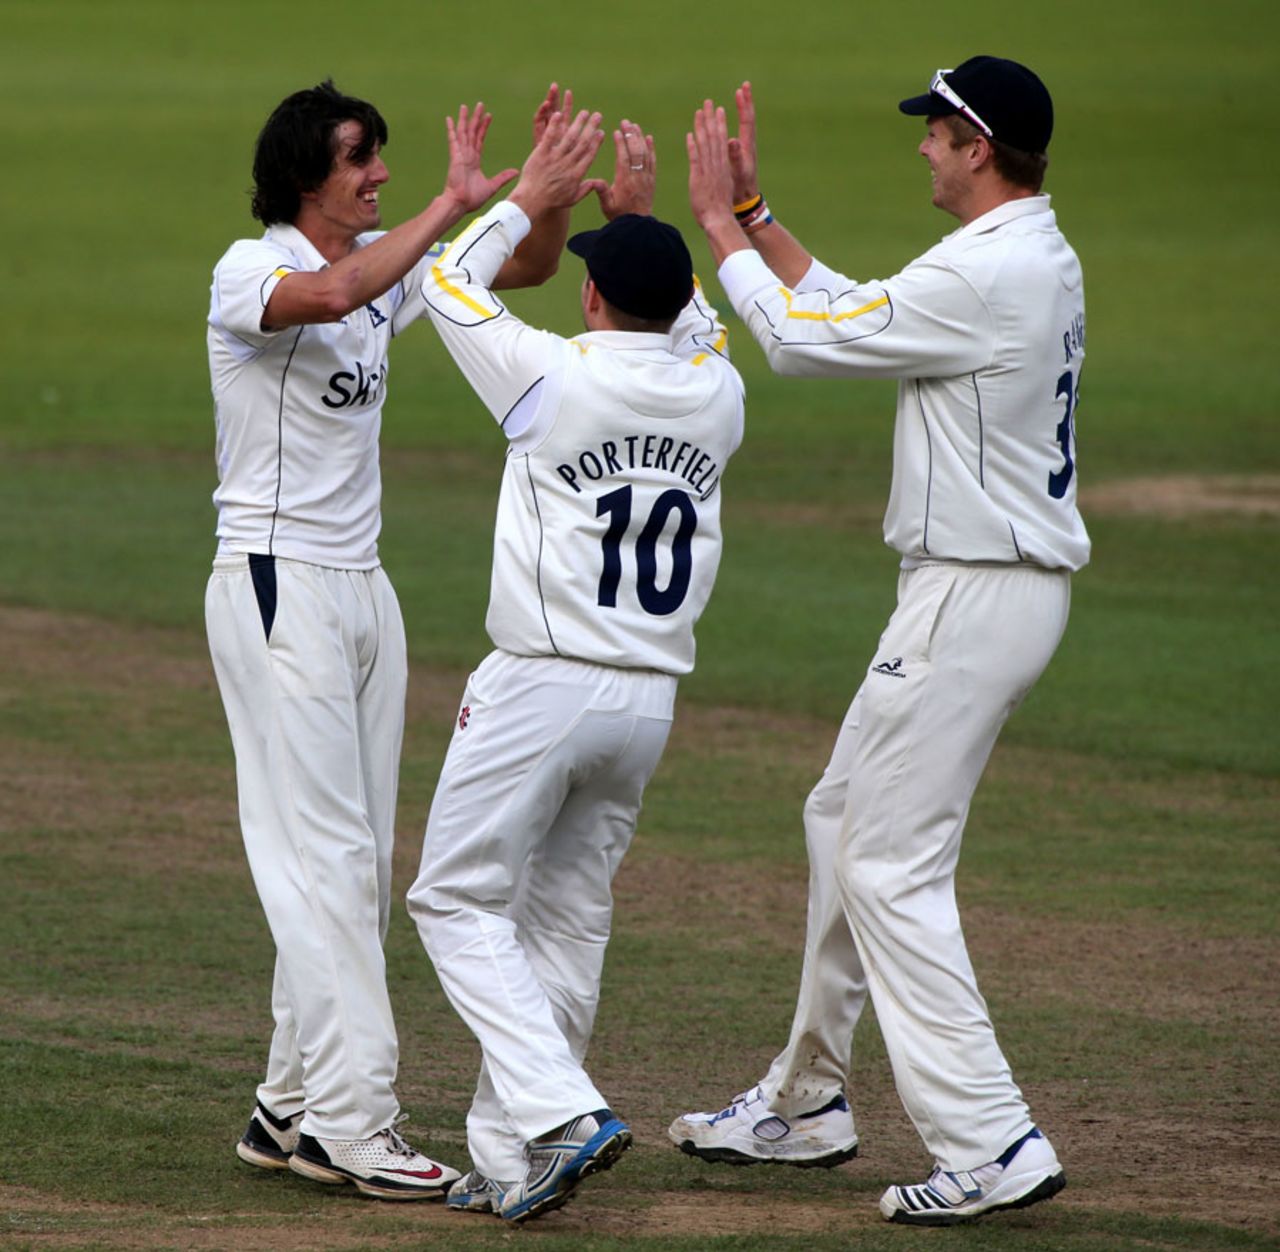 Chris Wright celebrates a wicket, Warwickshire v Nottinghamshire, County Championship, Division One, Edgbaston, August 30, 2012